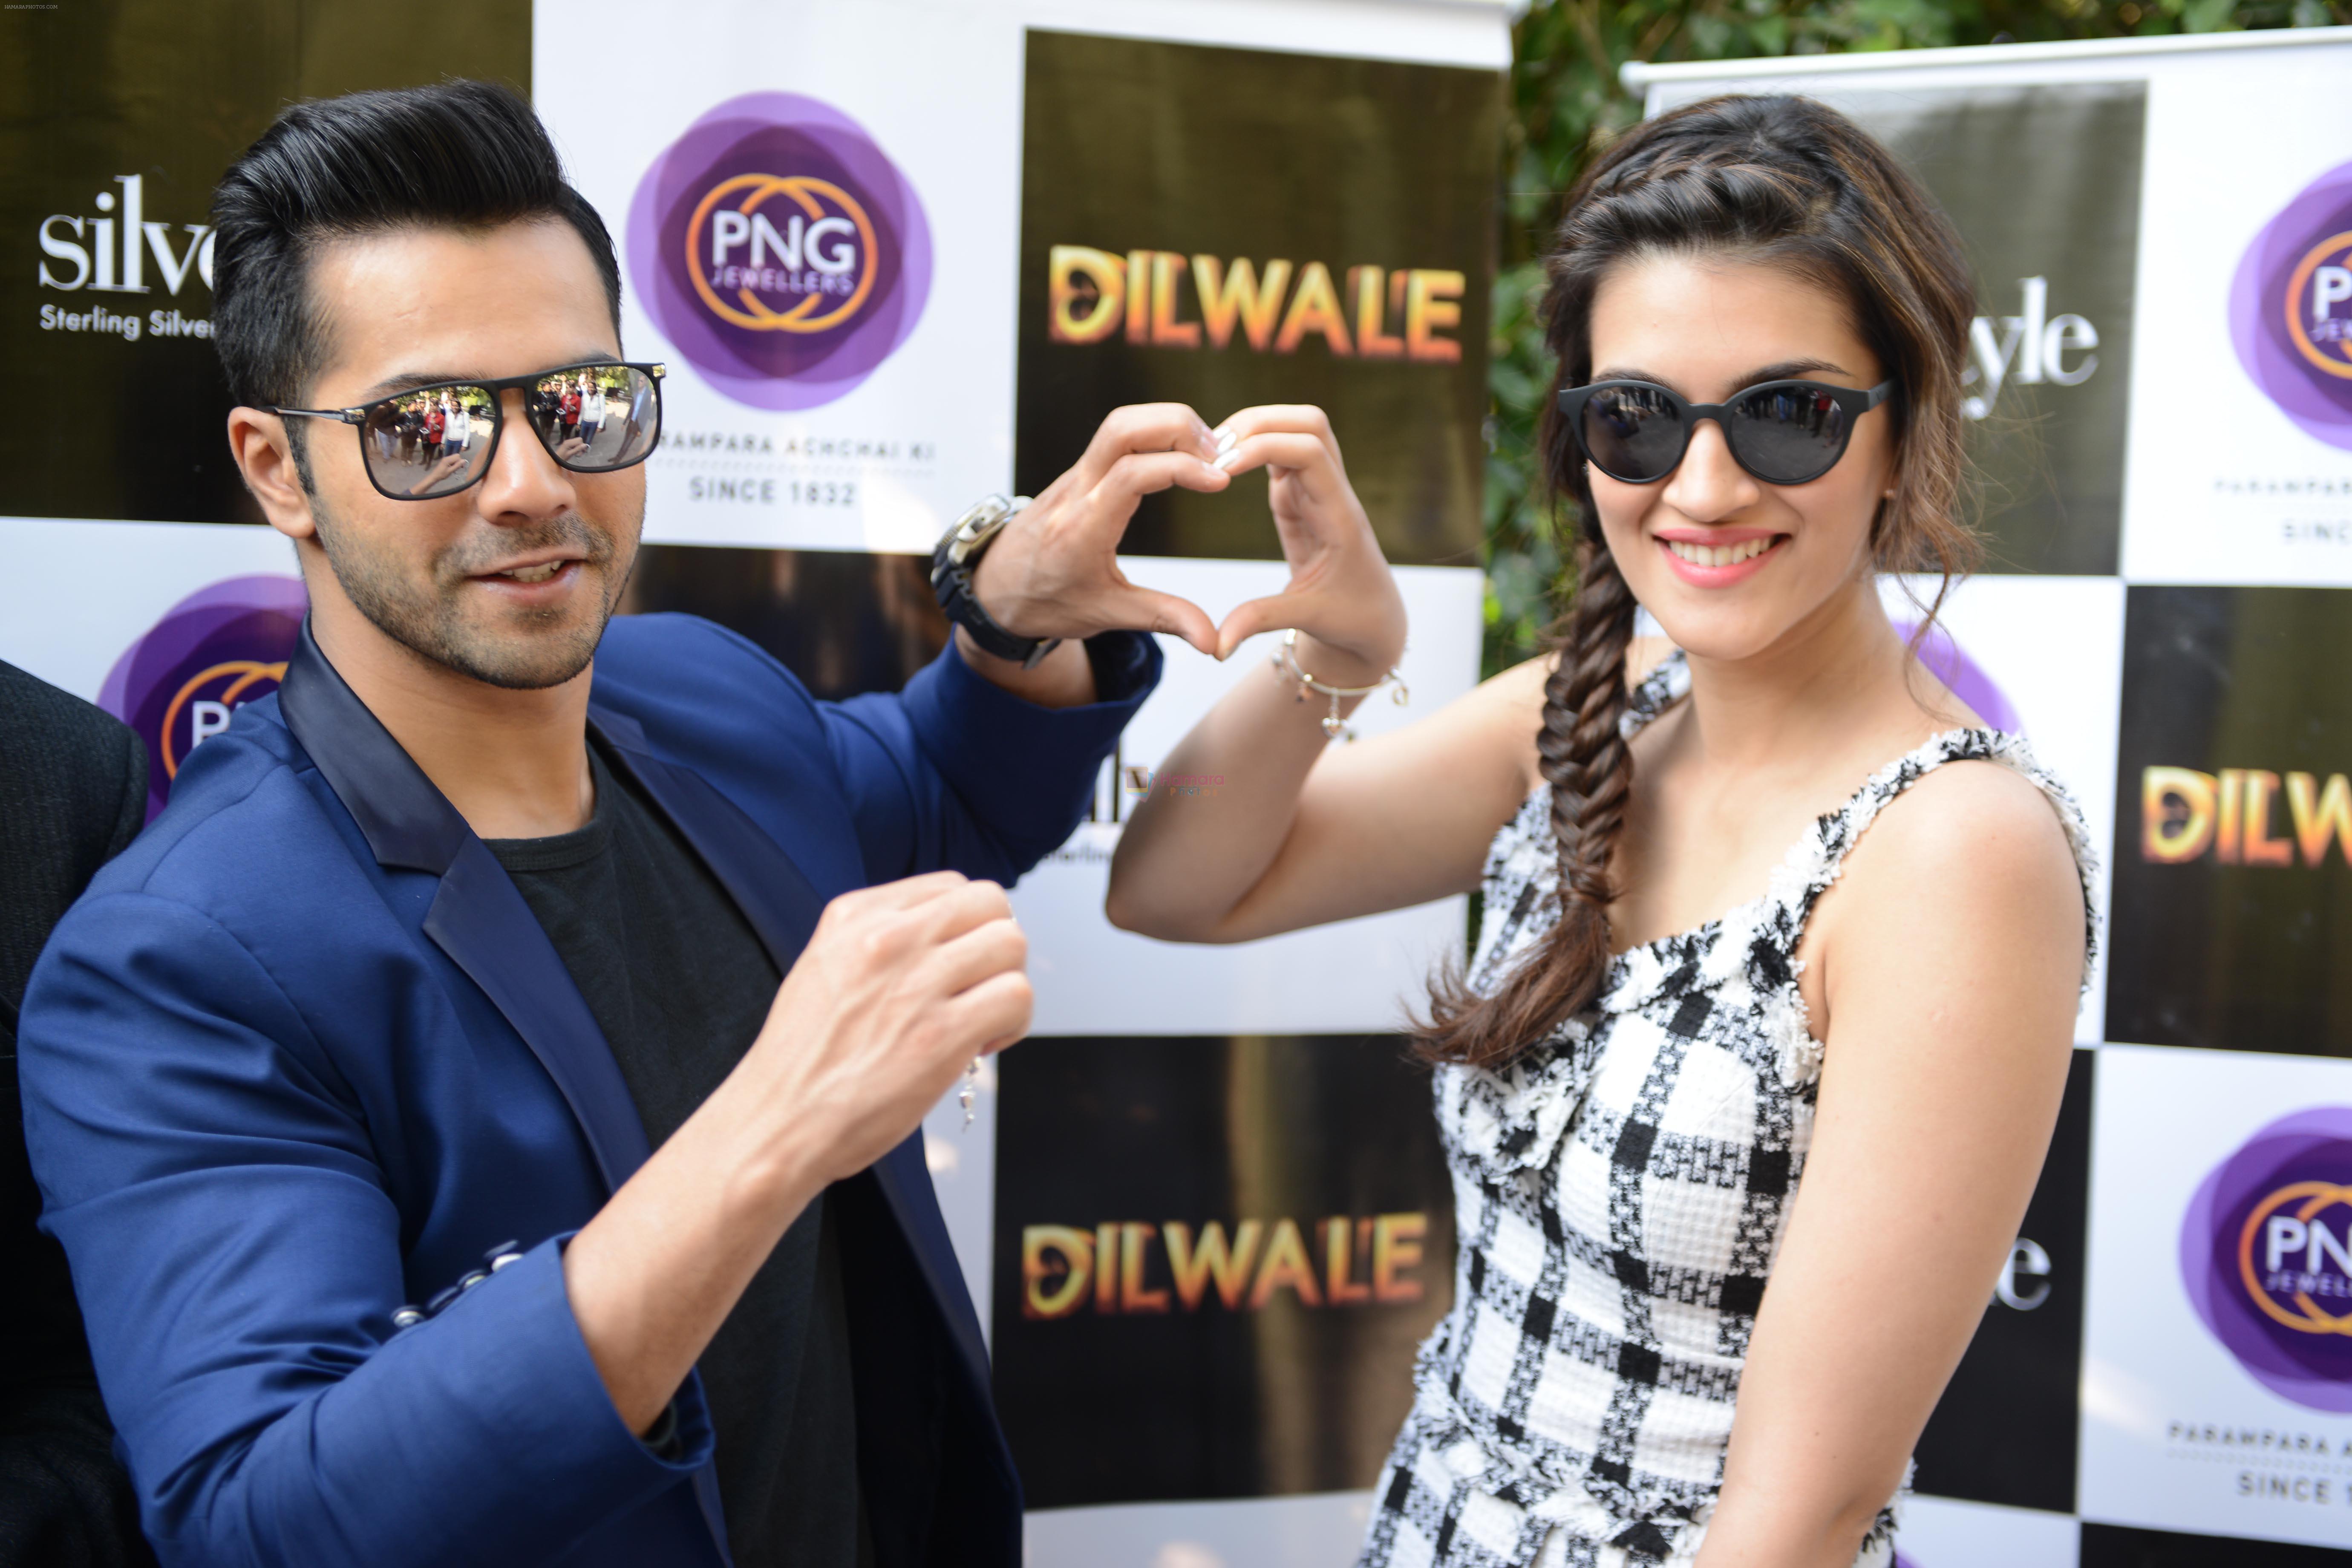 Varun Dhawan and Kriti Sanon with the Dilwale charm bracelet by Silvostyle